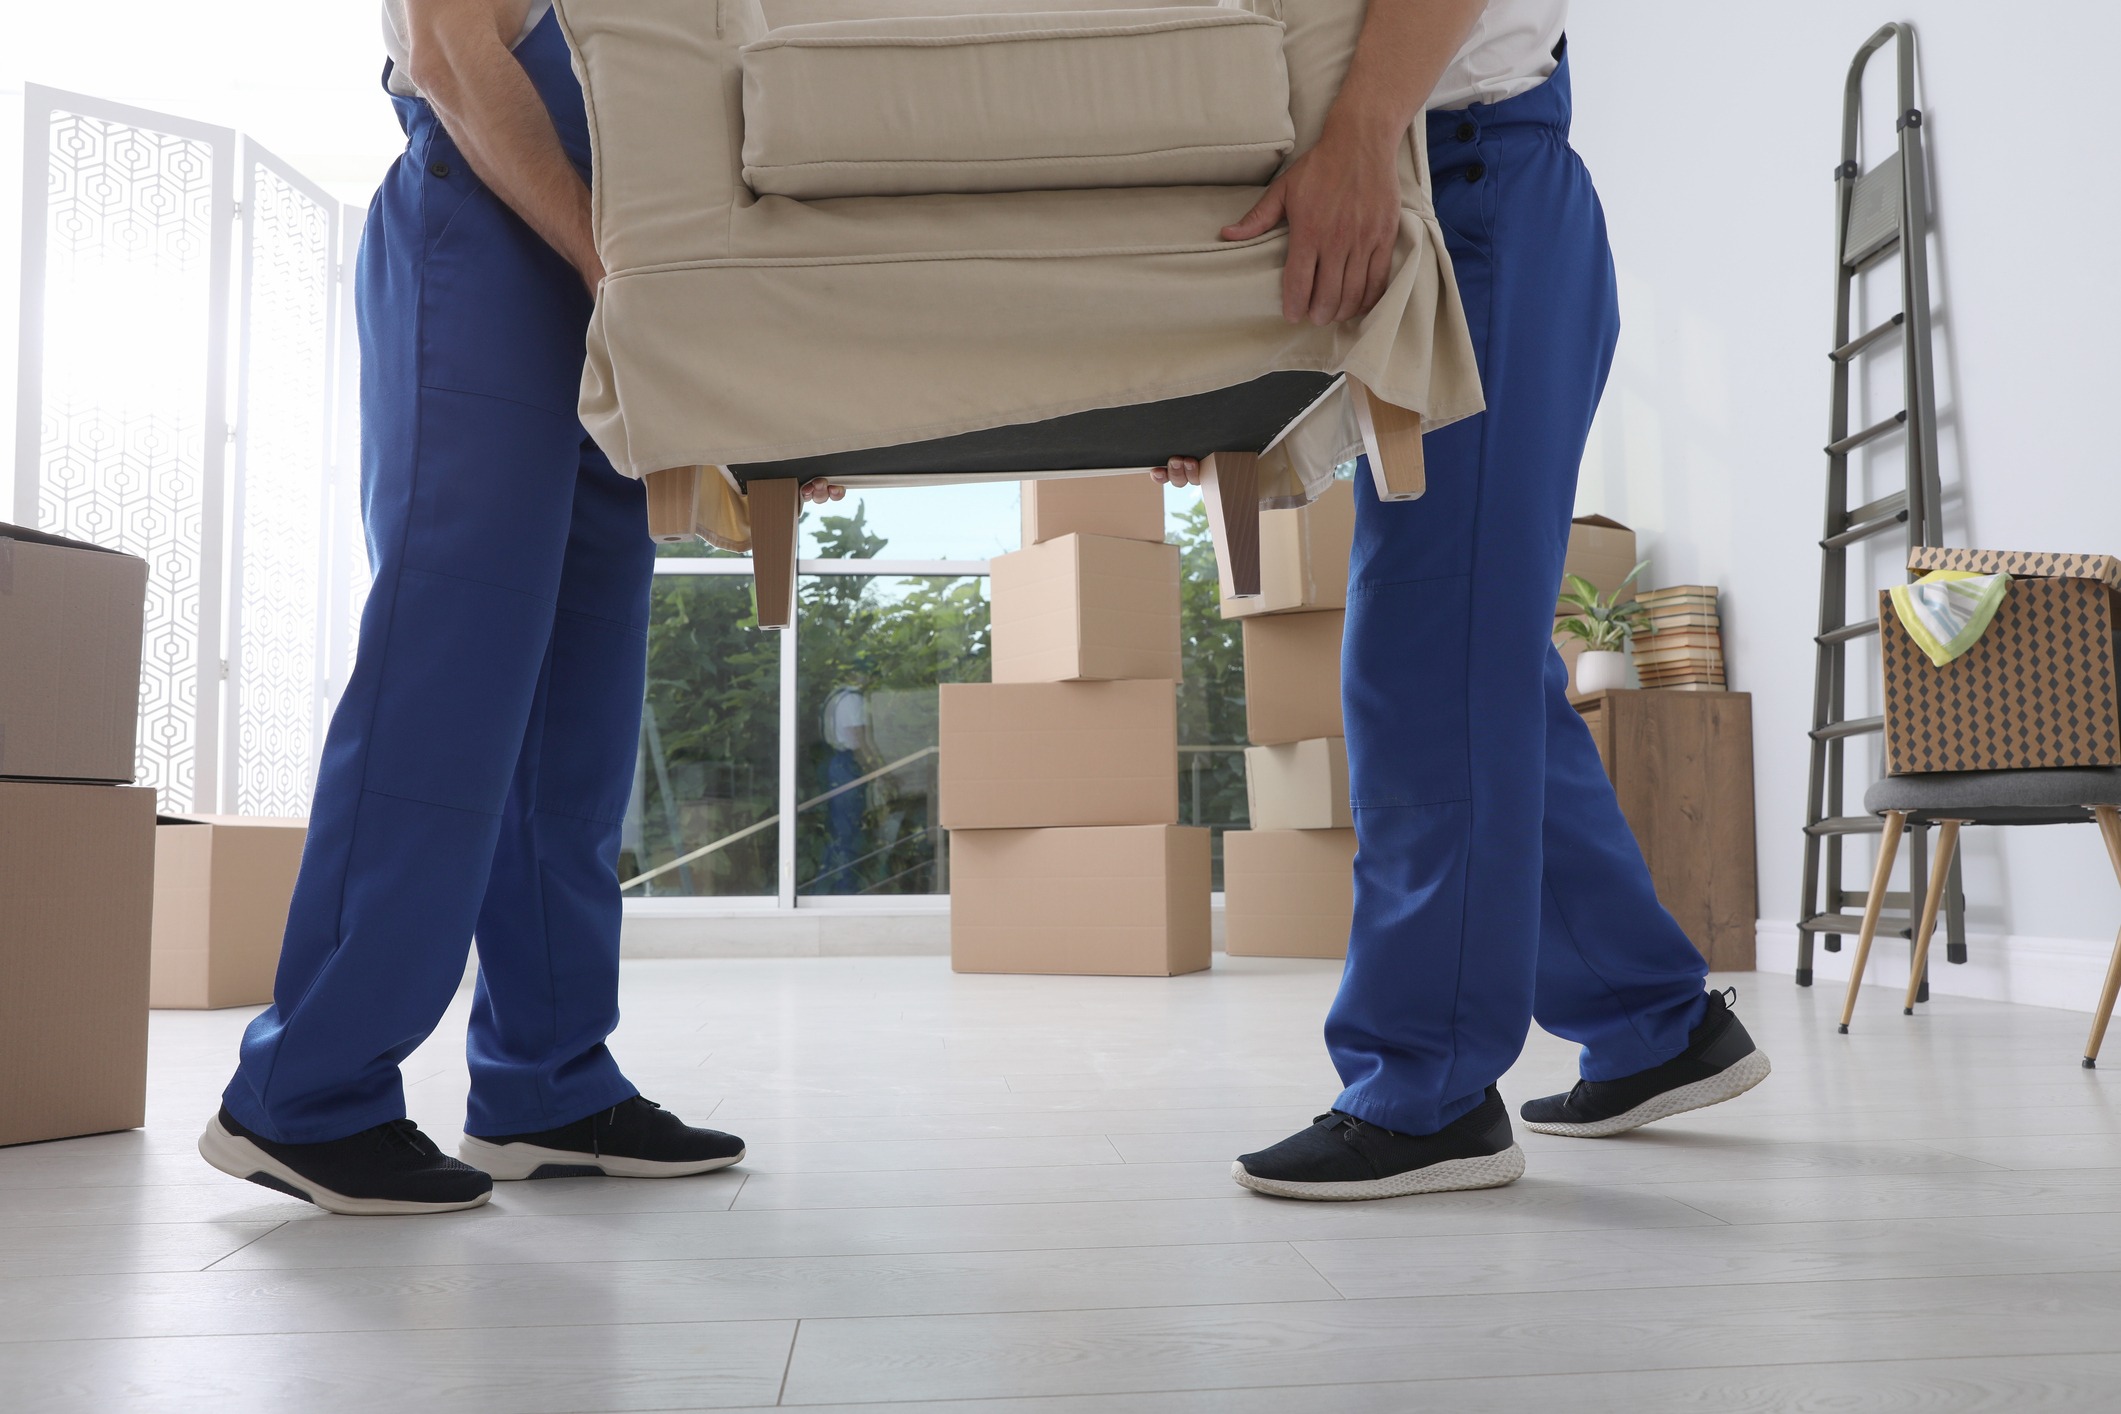 Two moving technicians work together to place a couch in a client's new home.